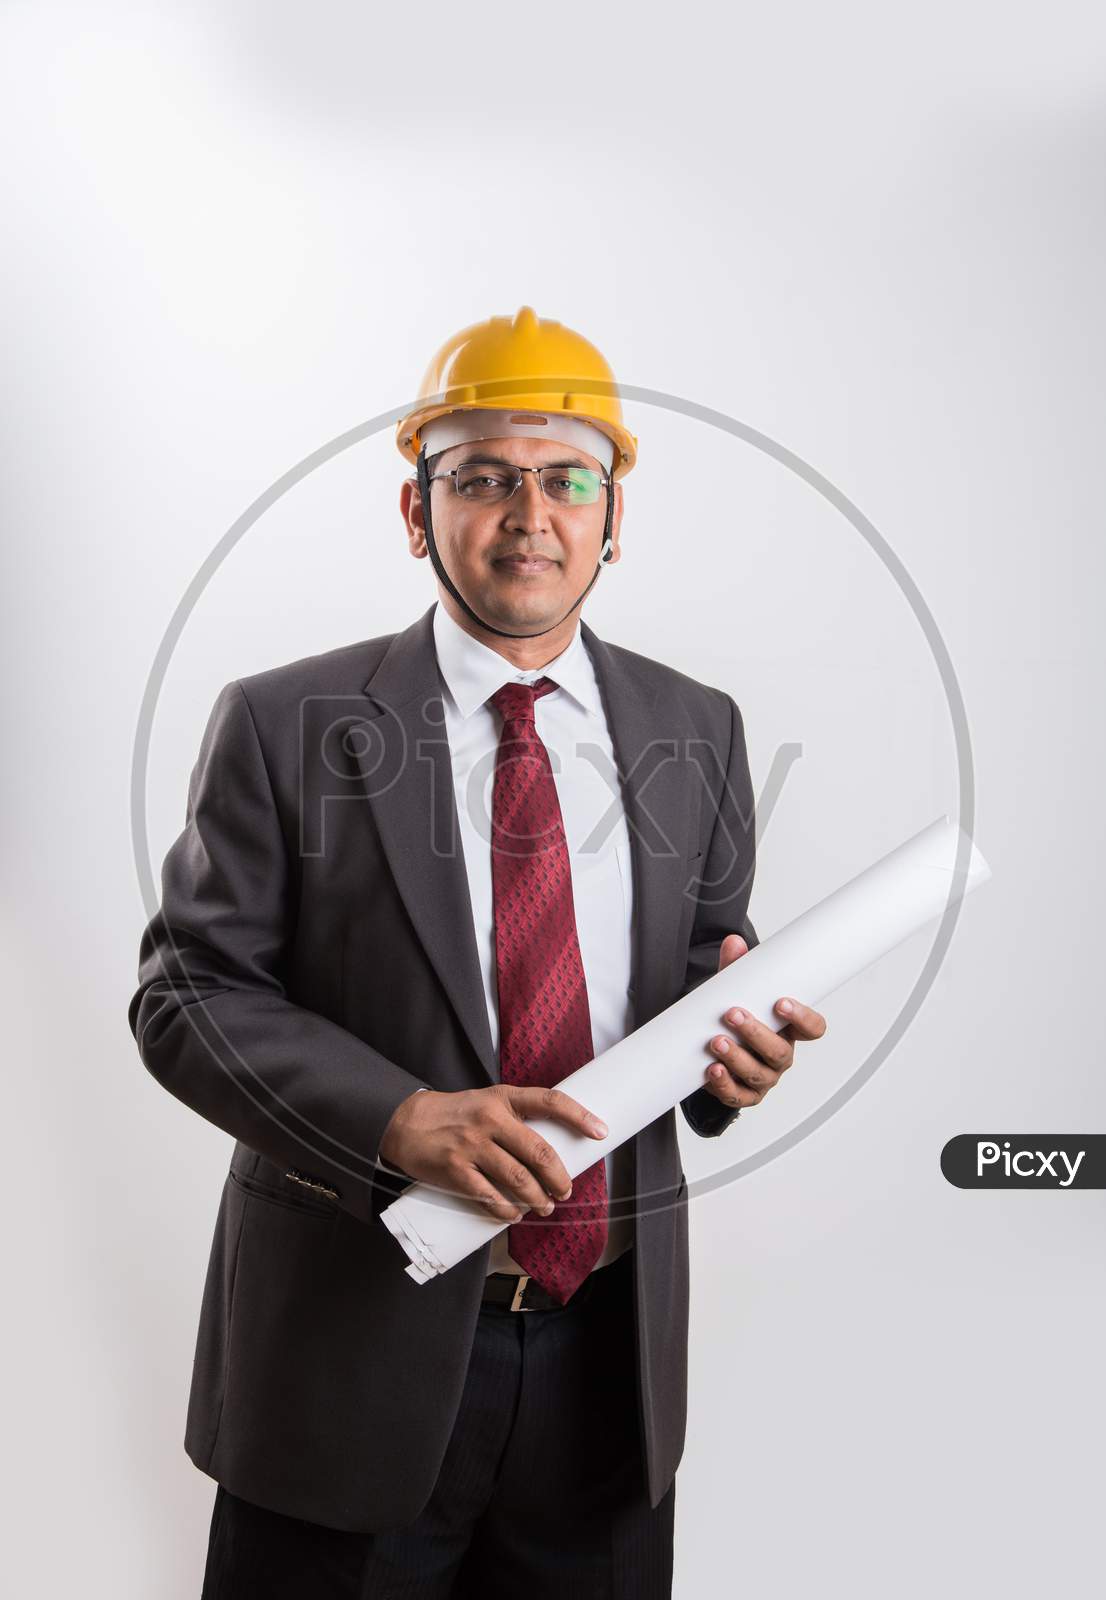 Indian handsome construction engineer / architect